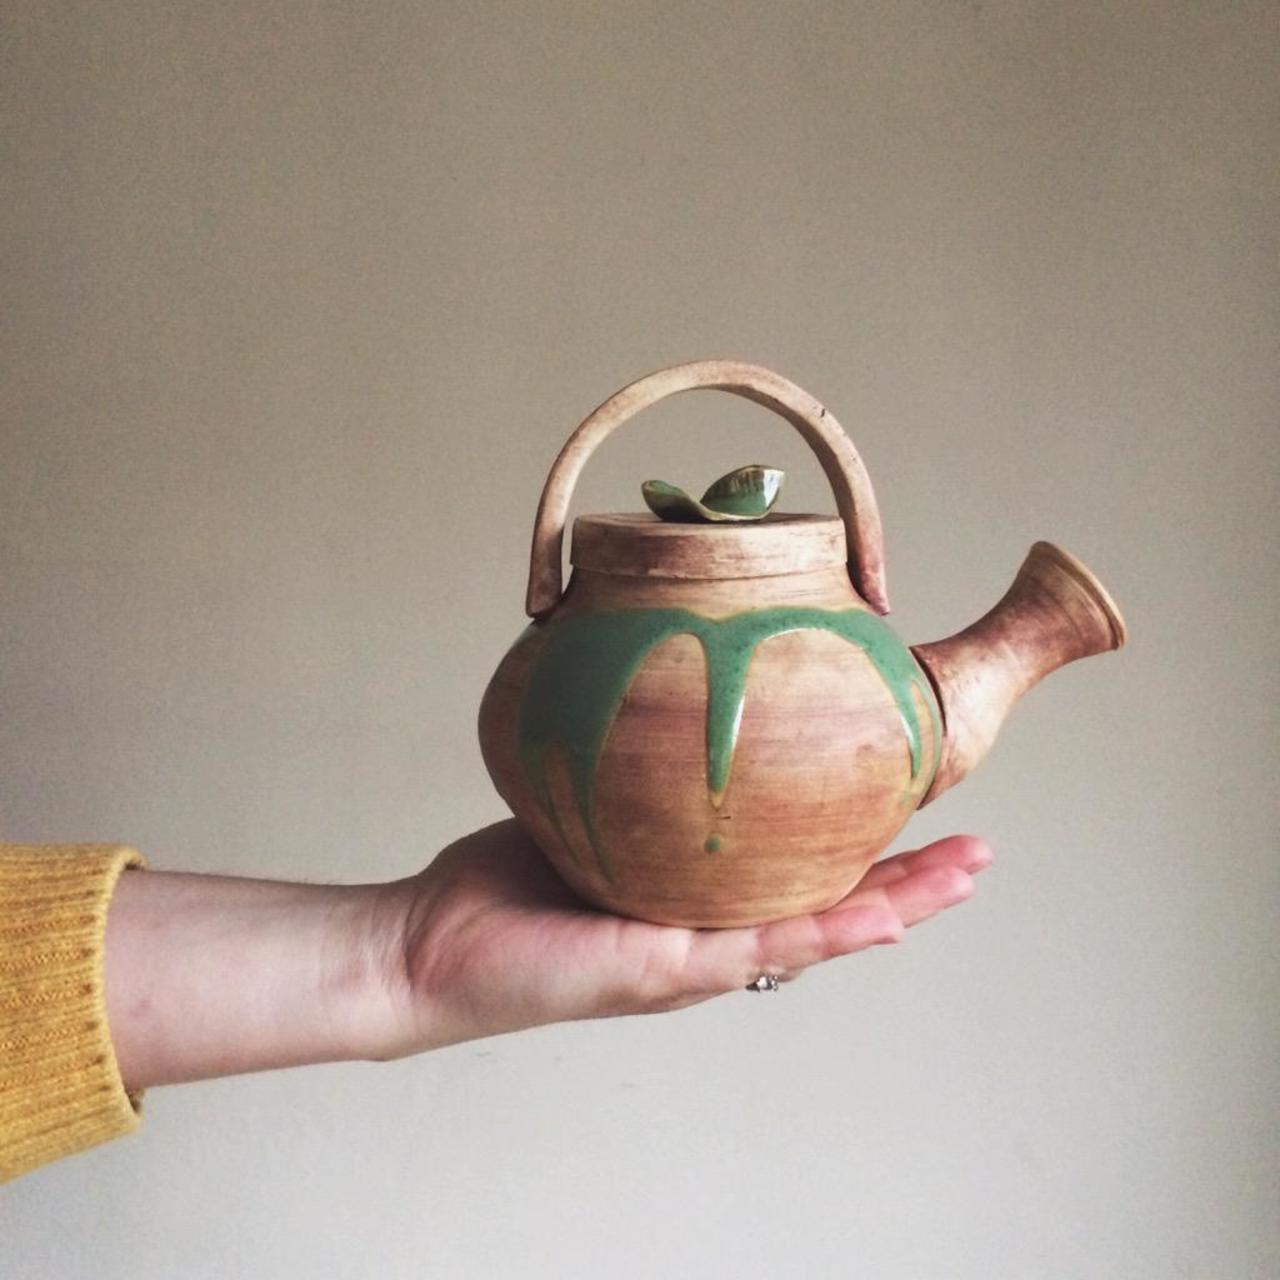 Check out the new teapot in the shop! #etsy http://theoakleafpotter.com #pottery #clay #ceramics #handmade #art #rustic http://t.co/cPykpPfN70